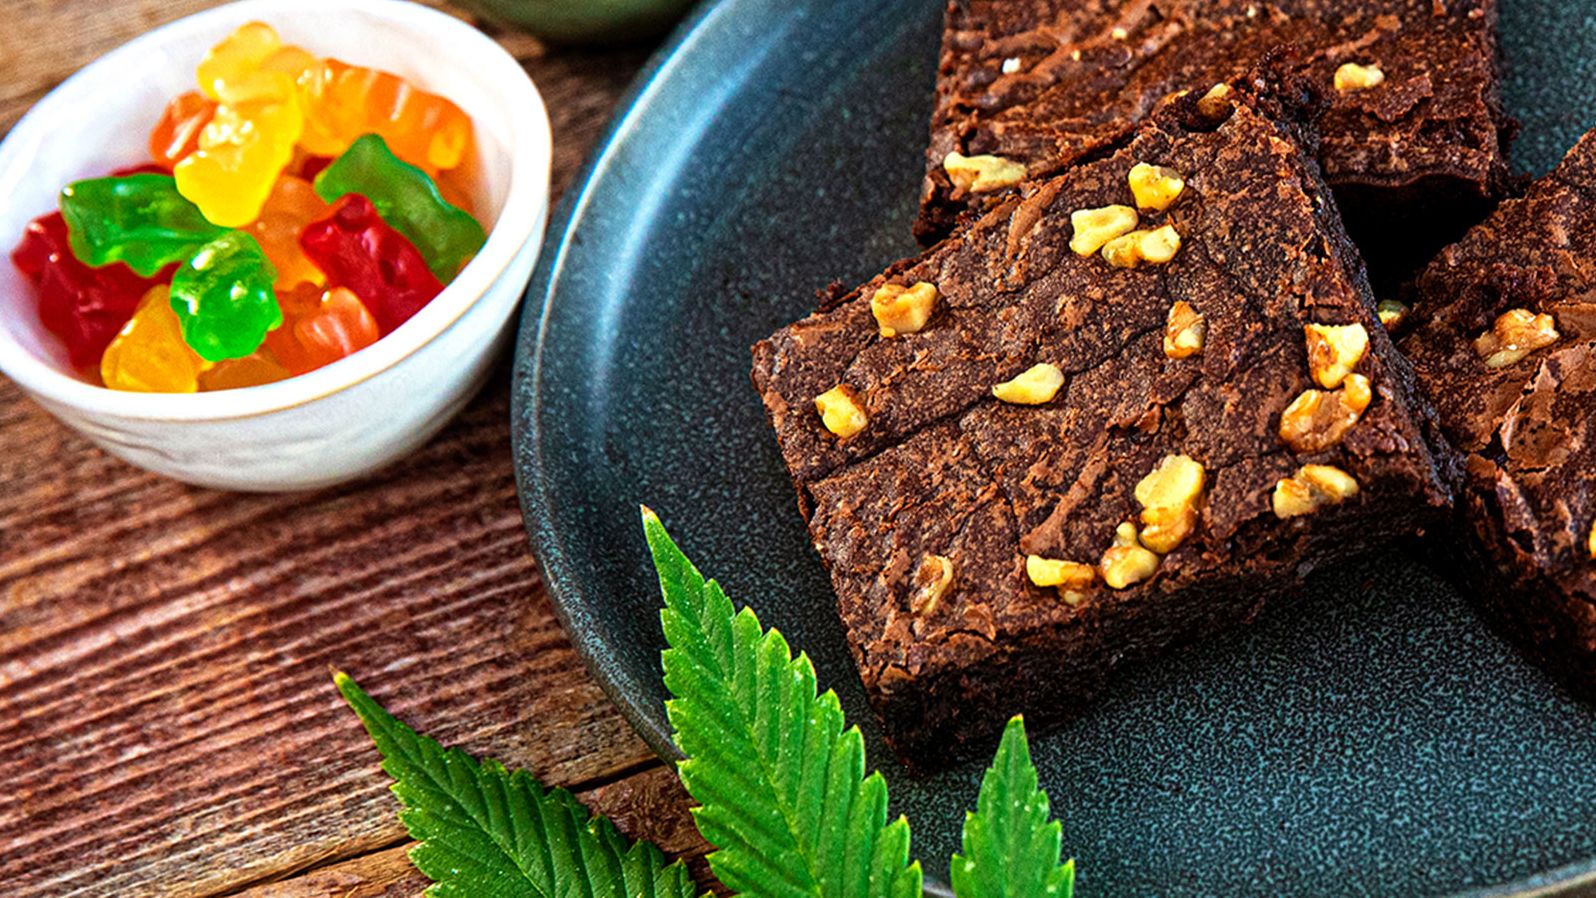 How to Choose the Right Strain for Your Edibles